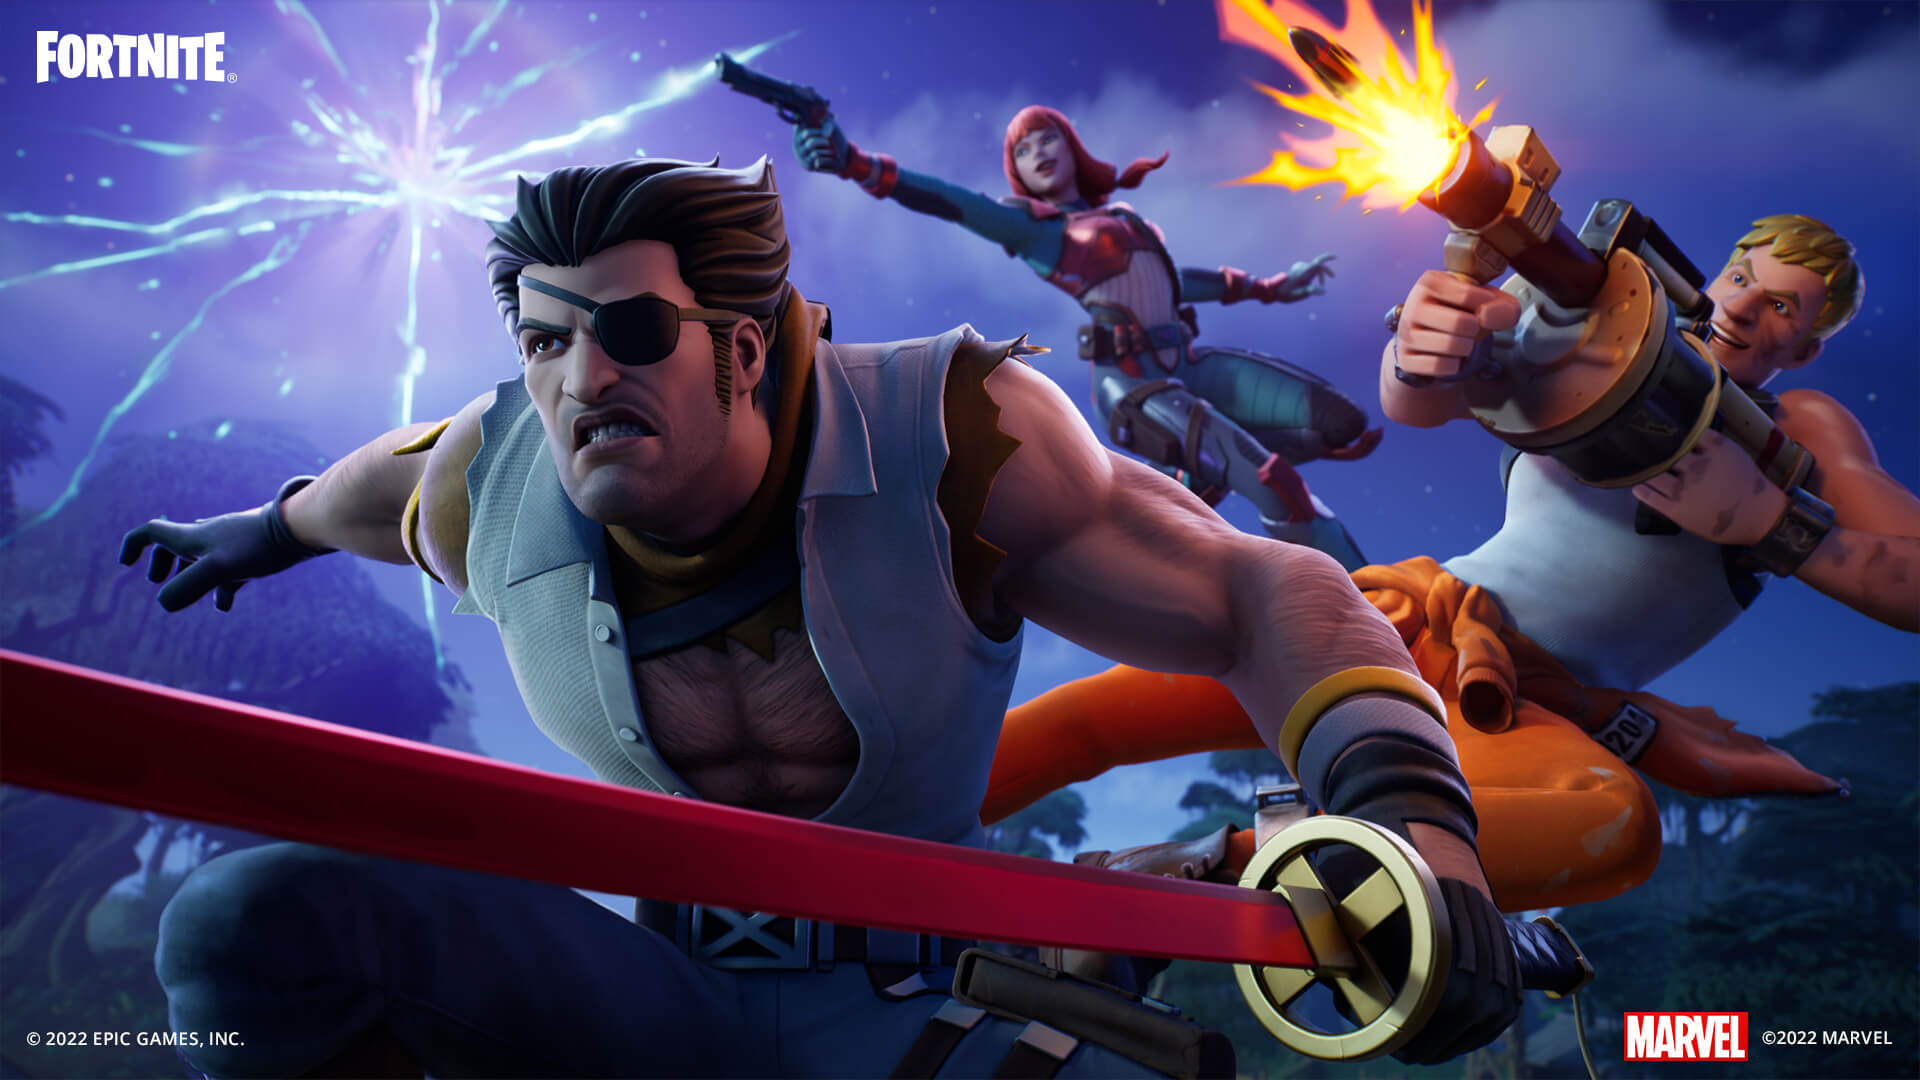 Fortnite x Wolverine Zero: Epic Games releases popular Marvel character as August Crew Pack exclusive skin